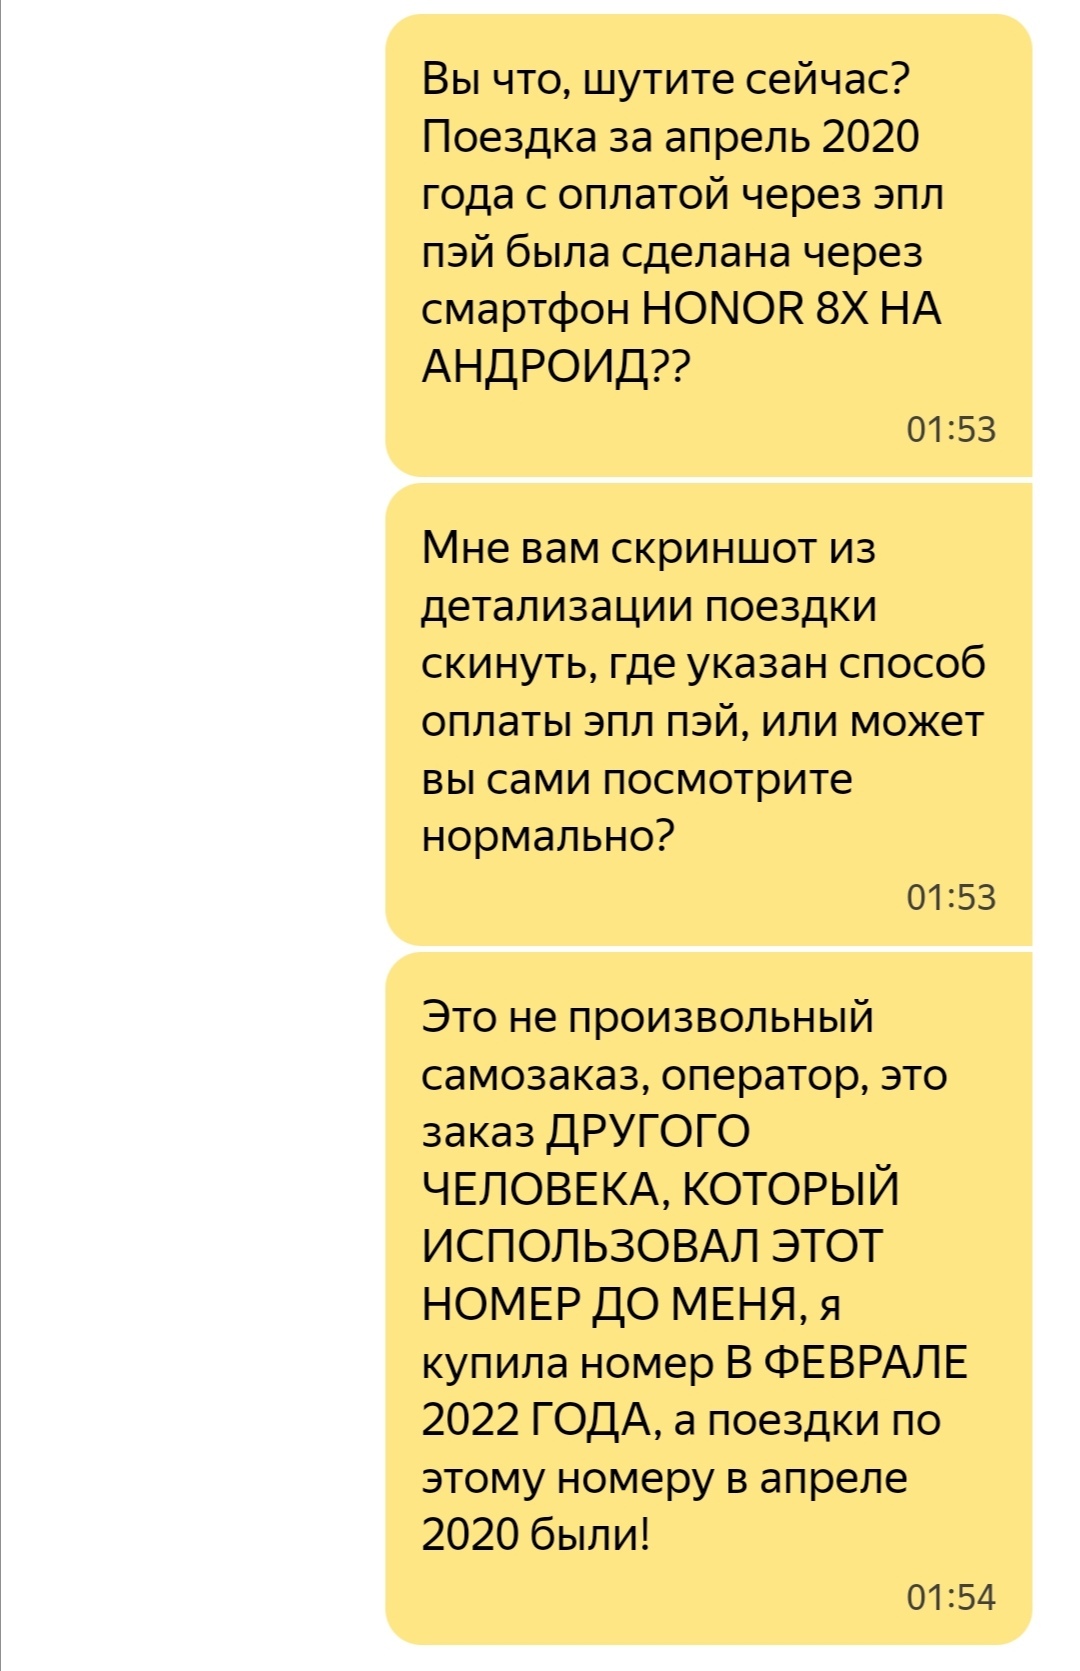 I changed the number and got a mountain of problems - My, Yandex., Duty, Phone number, League of Lawyers, Help, Longpost